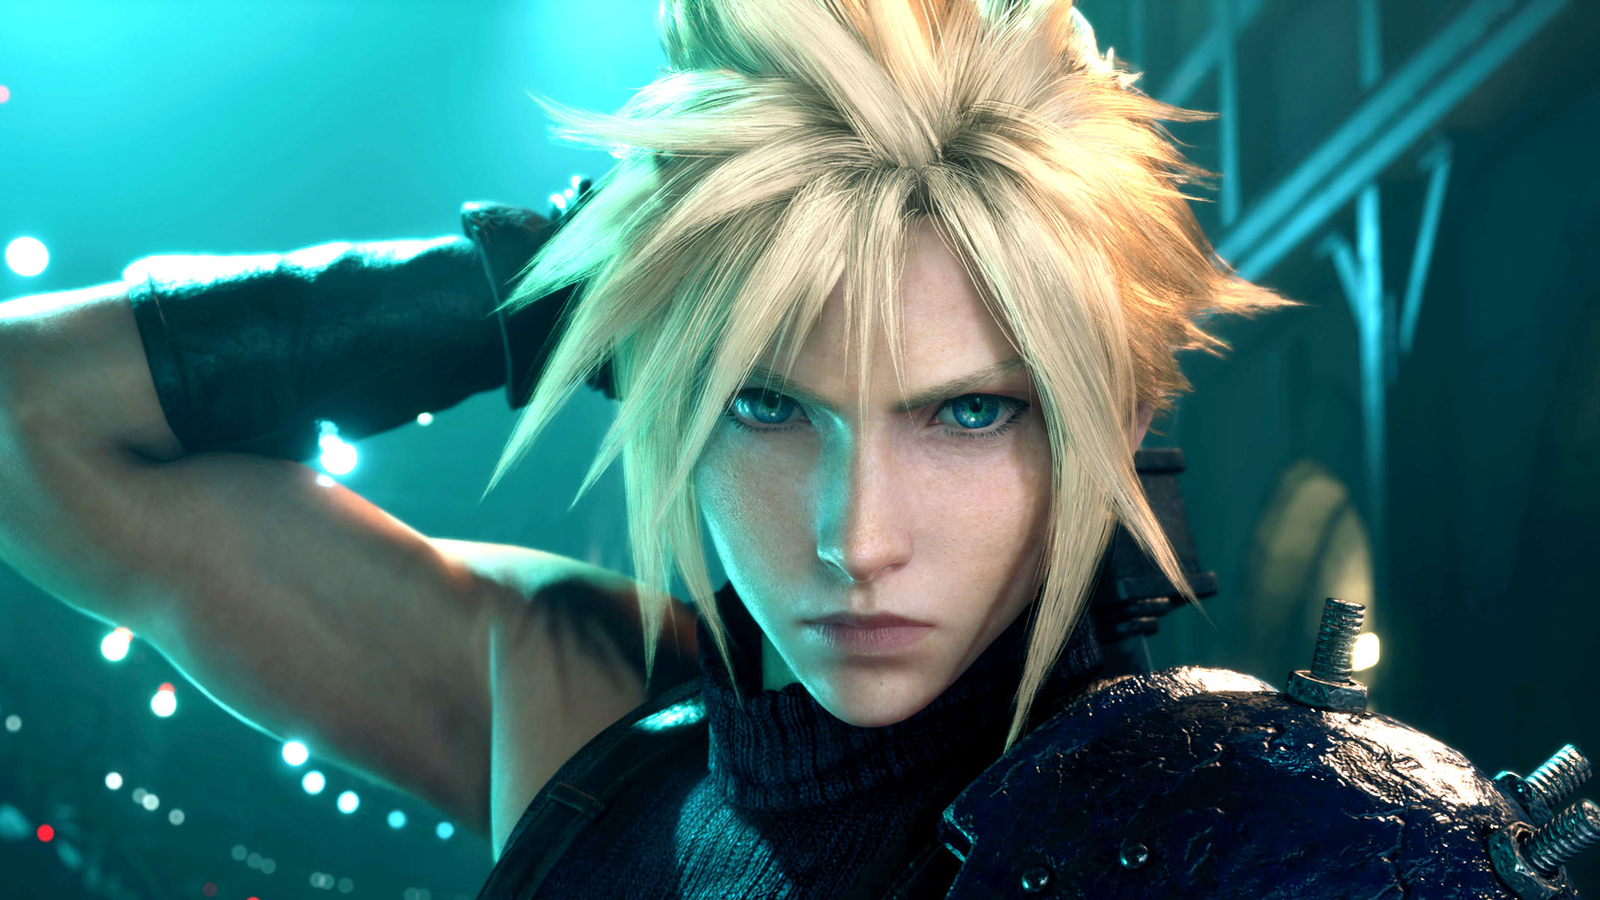 Final Fantasy 7 Remake could have been in two parts, rather than a